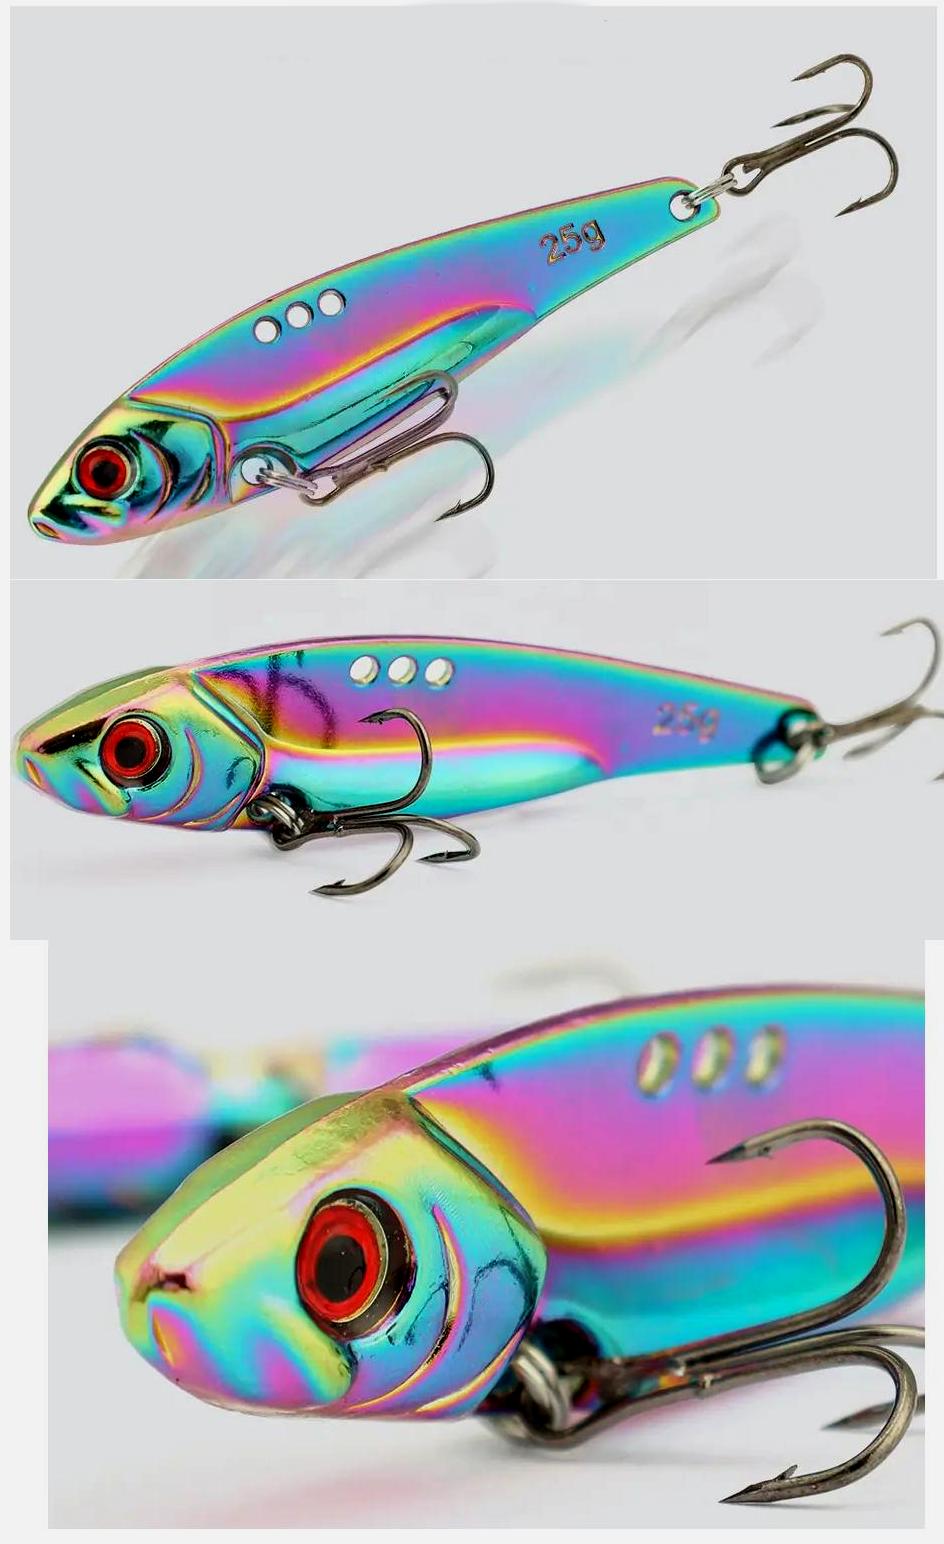 Metal Vibe Bait highly reflective